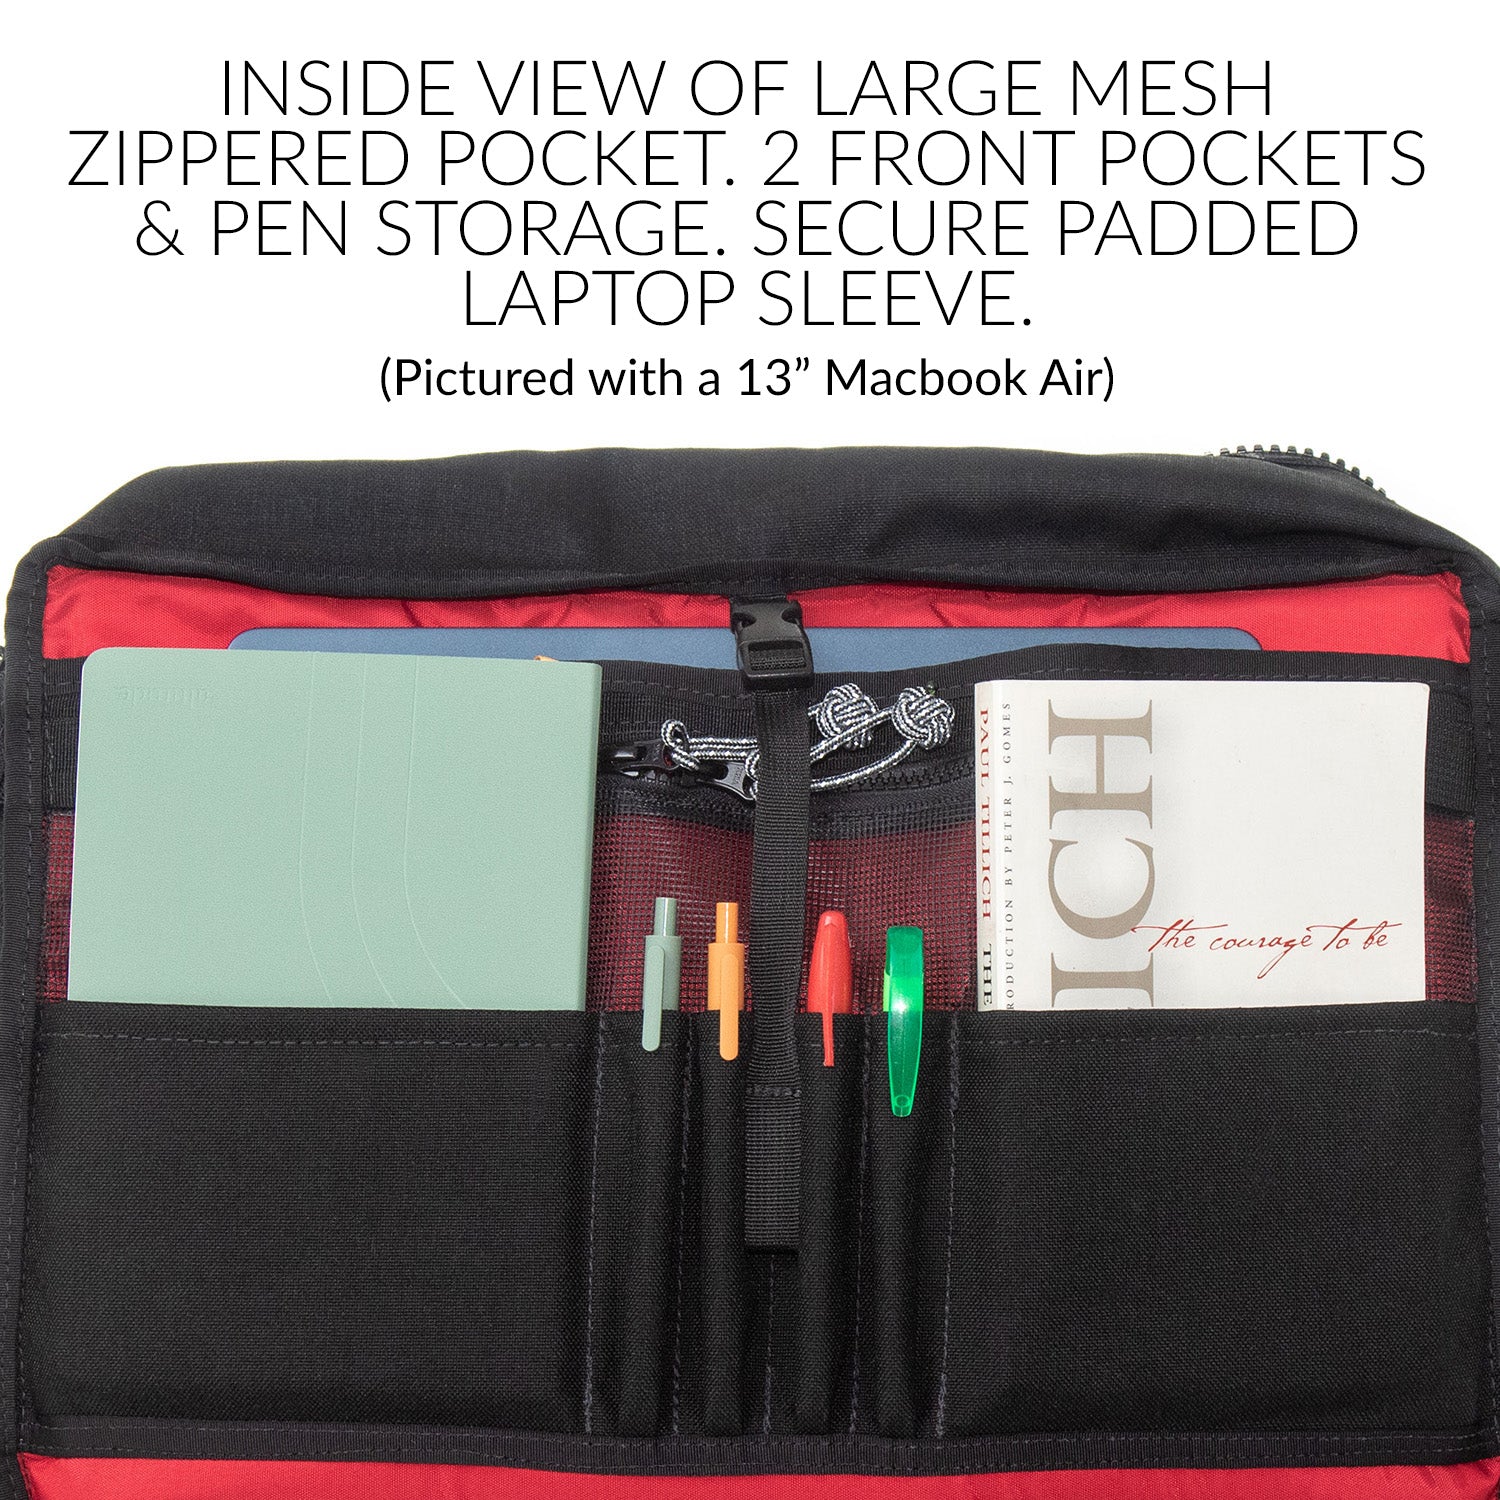 Inside view of large mesh zippered pocket.  two front pockets & pen storage . Secure padded laptop sleeve,  pictured with Macbook Air thirteen inch 